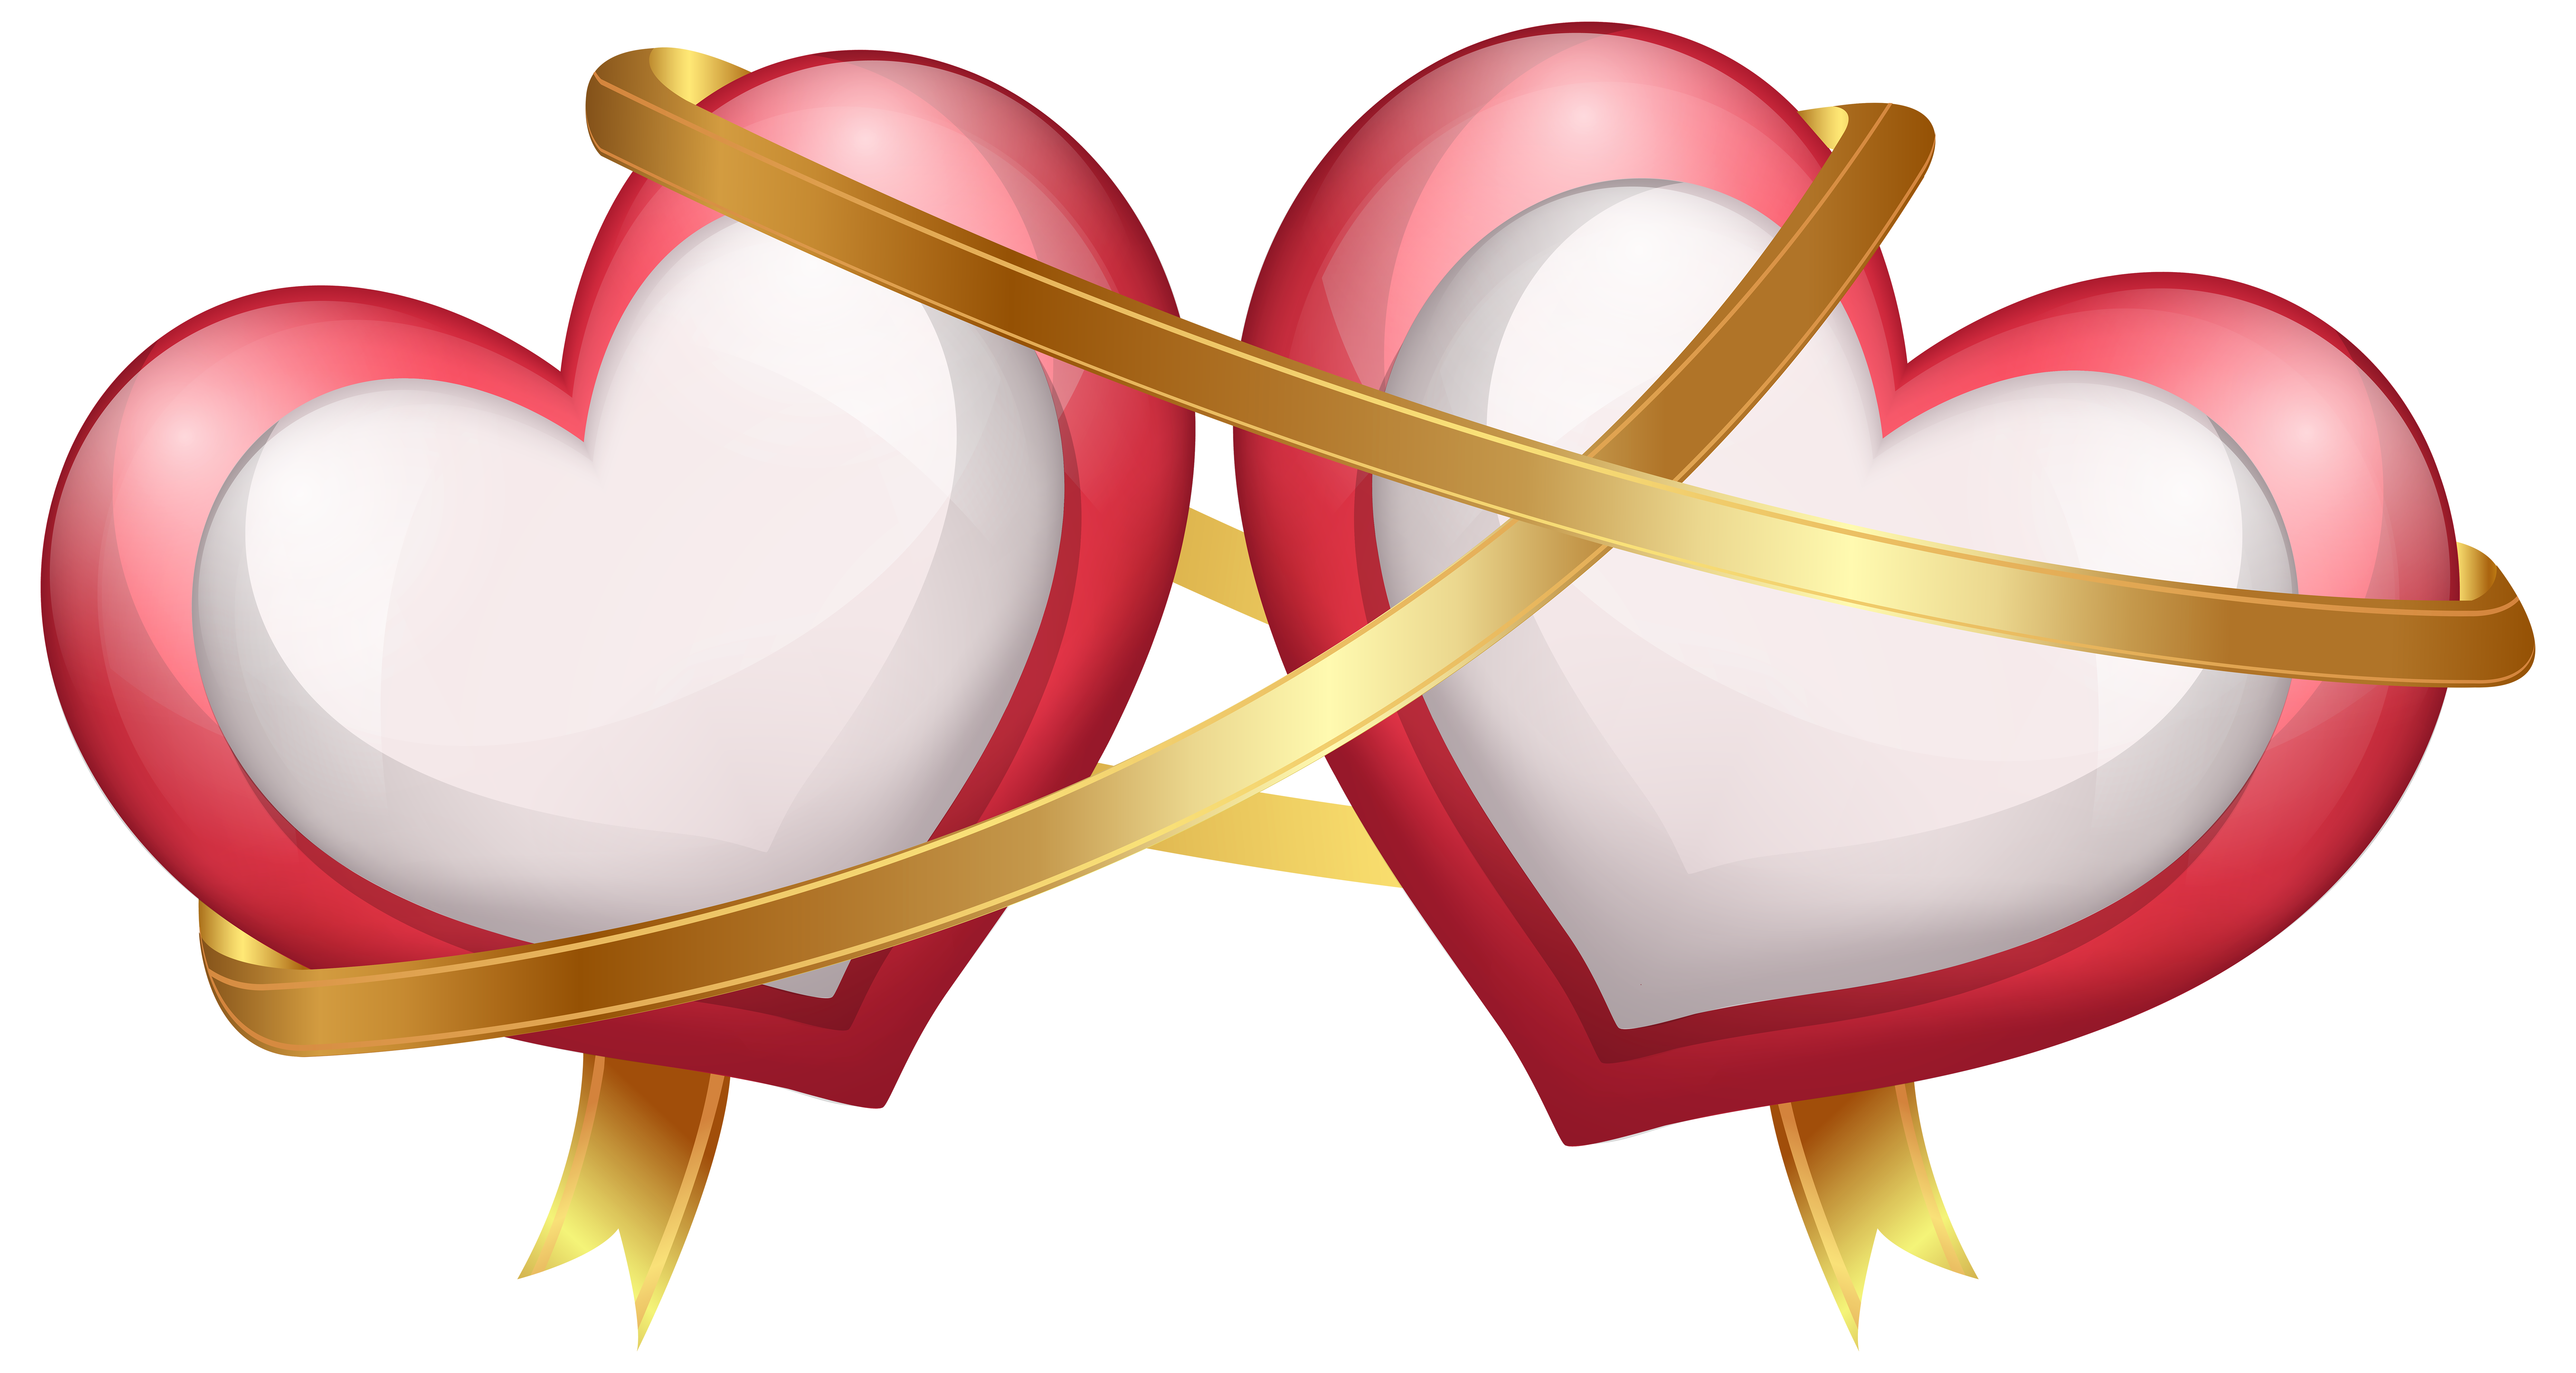 two pink hearts clip art